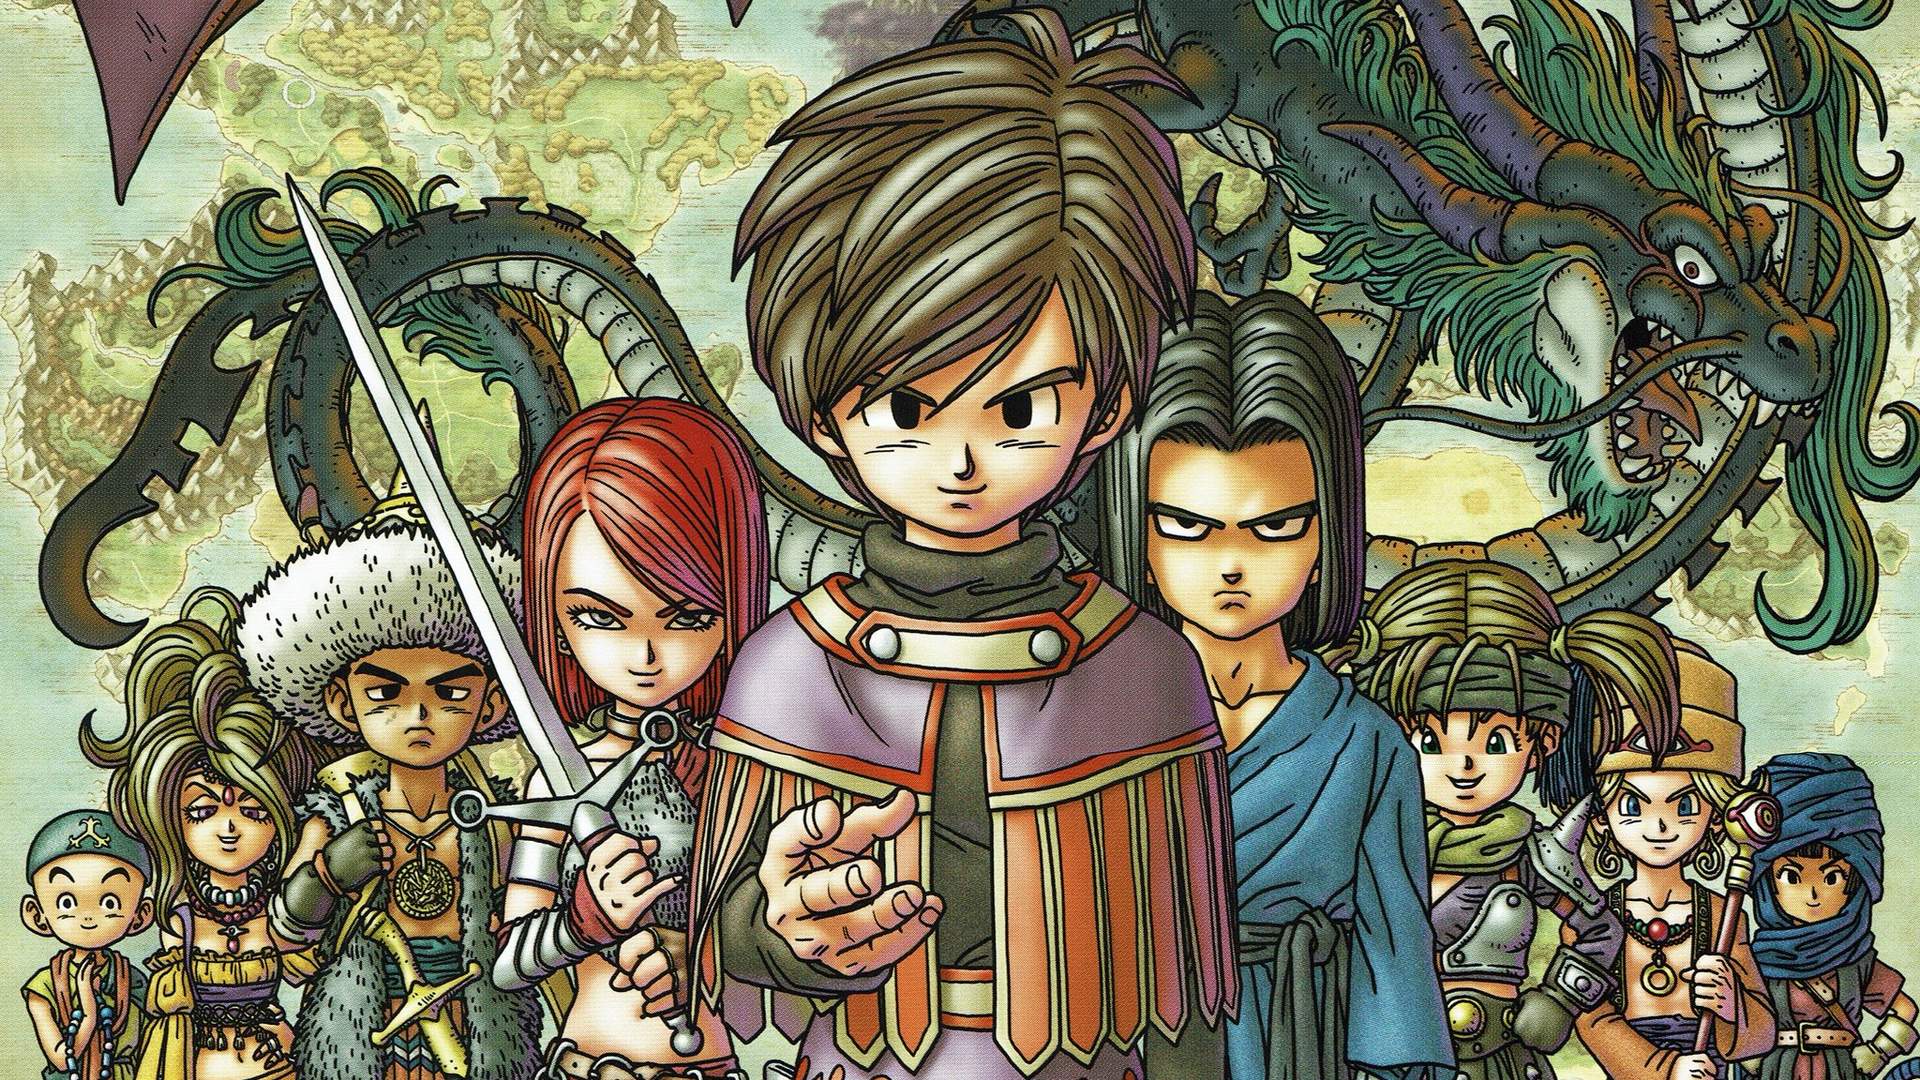 Ranking Every Dragon Quest Spin-Off Game From Worst To Best